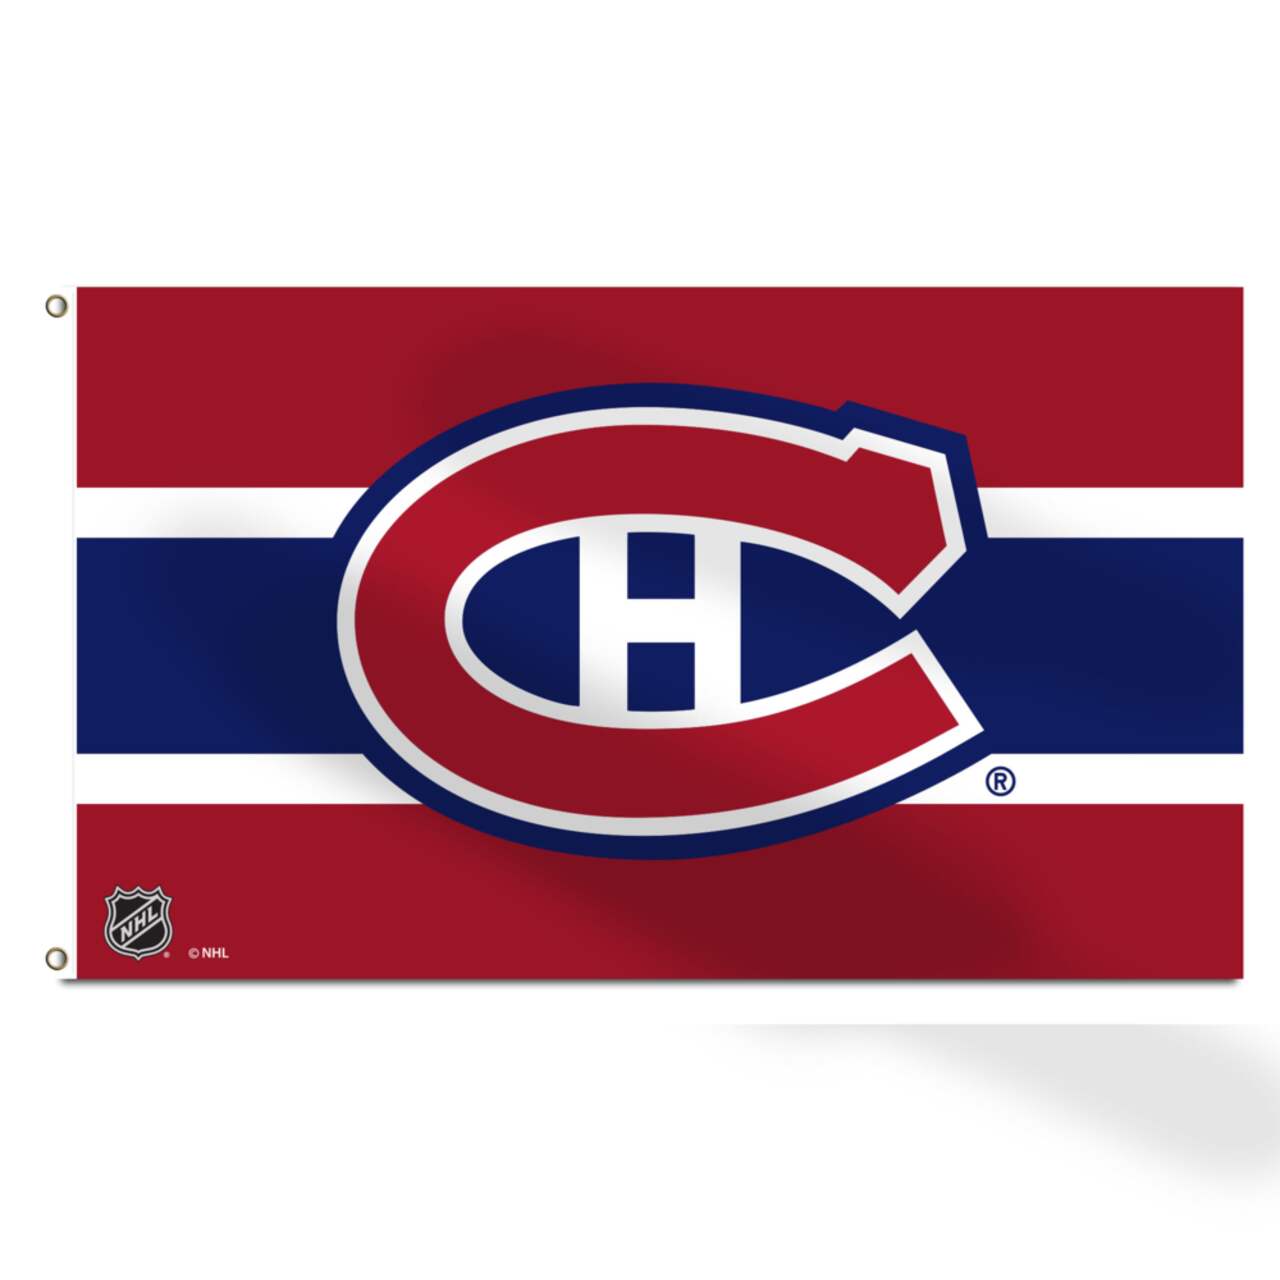 https://media-www.canadiantire.ca/product/playing/hockey/hockey-accessories/0836001/montreal-canadiens-3-x5-flag-bab1b7f6-db0e-4644-8eb8-70990702d3fc.png?imdensity=1&imwidth=640&impolicy=mZoom